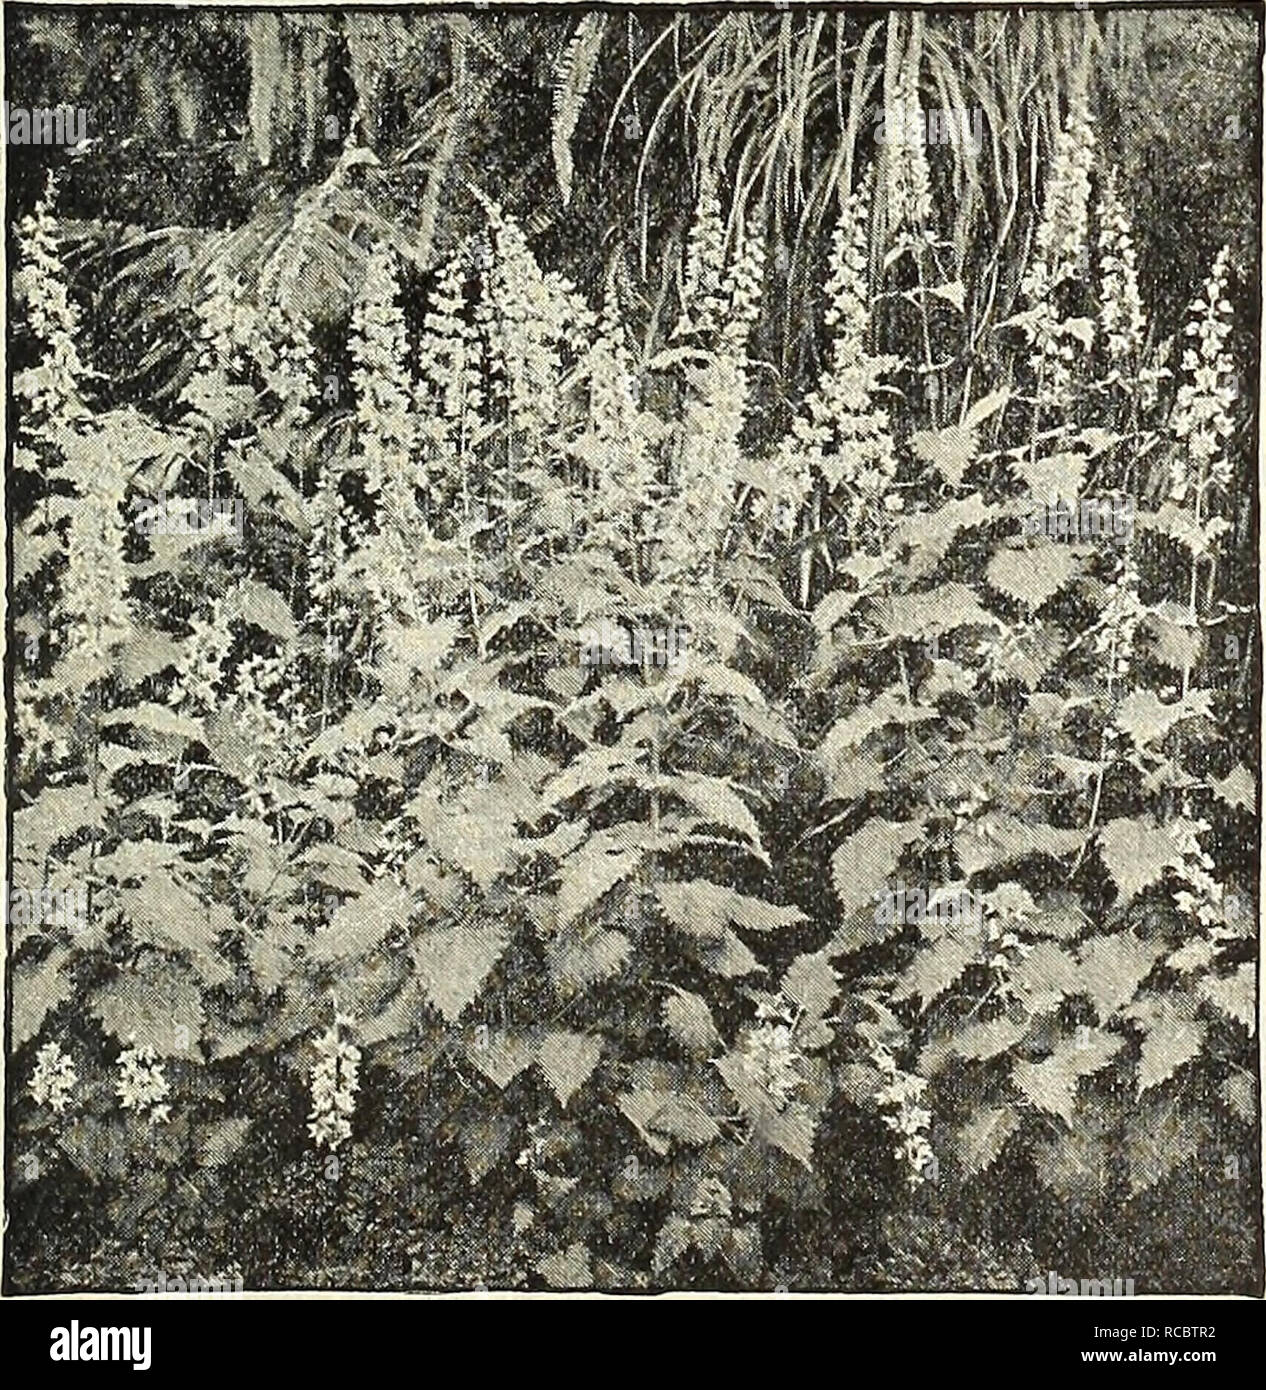 . Dreer's autumn 1902 catalogue. Bulbs (Plants) Catalogs; Flowers Seeds Catalogs; Gardening Equipment and supplies Catalogs; Nurseries (Horticulture) Catalogs; Fruit Seeds Catalogs. Carnation.. Coleus Thyrsoideus. Gainvillea Sandekiana. CAREX. Japonica Variegata. An orna- mental Japanese grass which is extremely useful as a house plant, of easy growth, standing the dry atmosphere of heated rooms with.impunity, and at the same time hardy if planted out in the garden in summer. 15 cts. each ; $1.50 per doz. Cestrum Parqui. (Night-blooming Jessamine.) A beautiful, tender shrub of easy cultivation Stock Photo